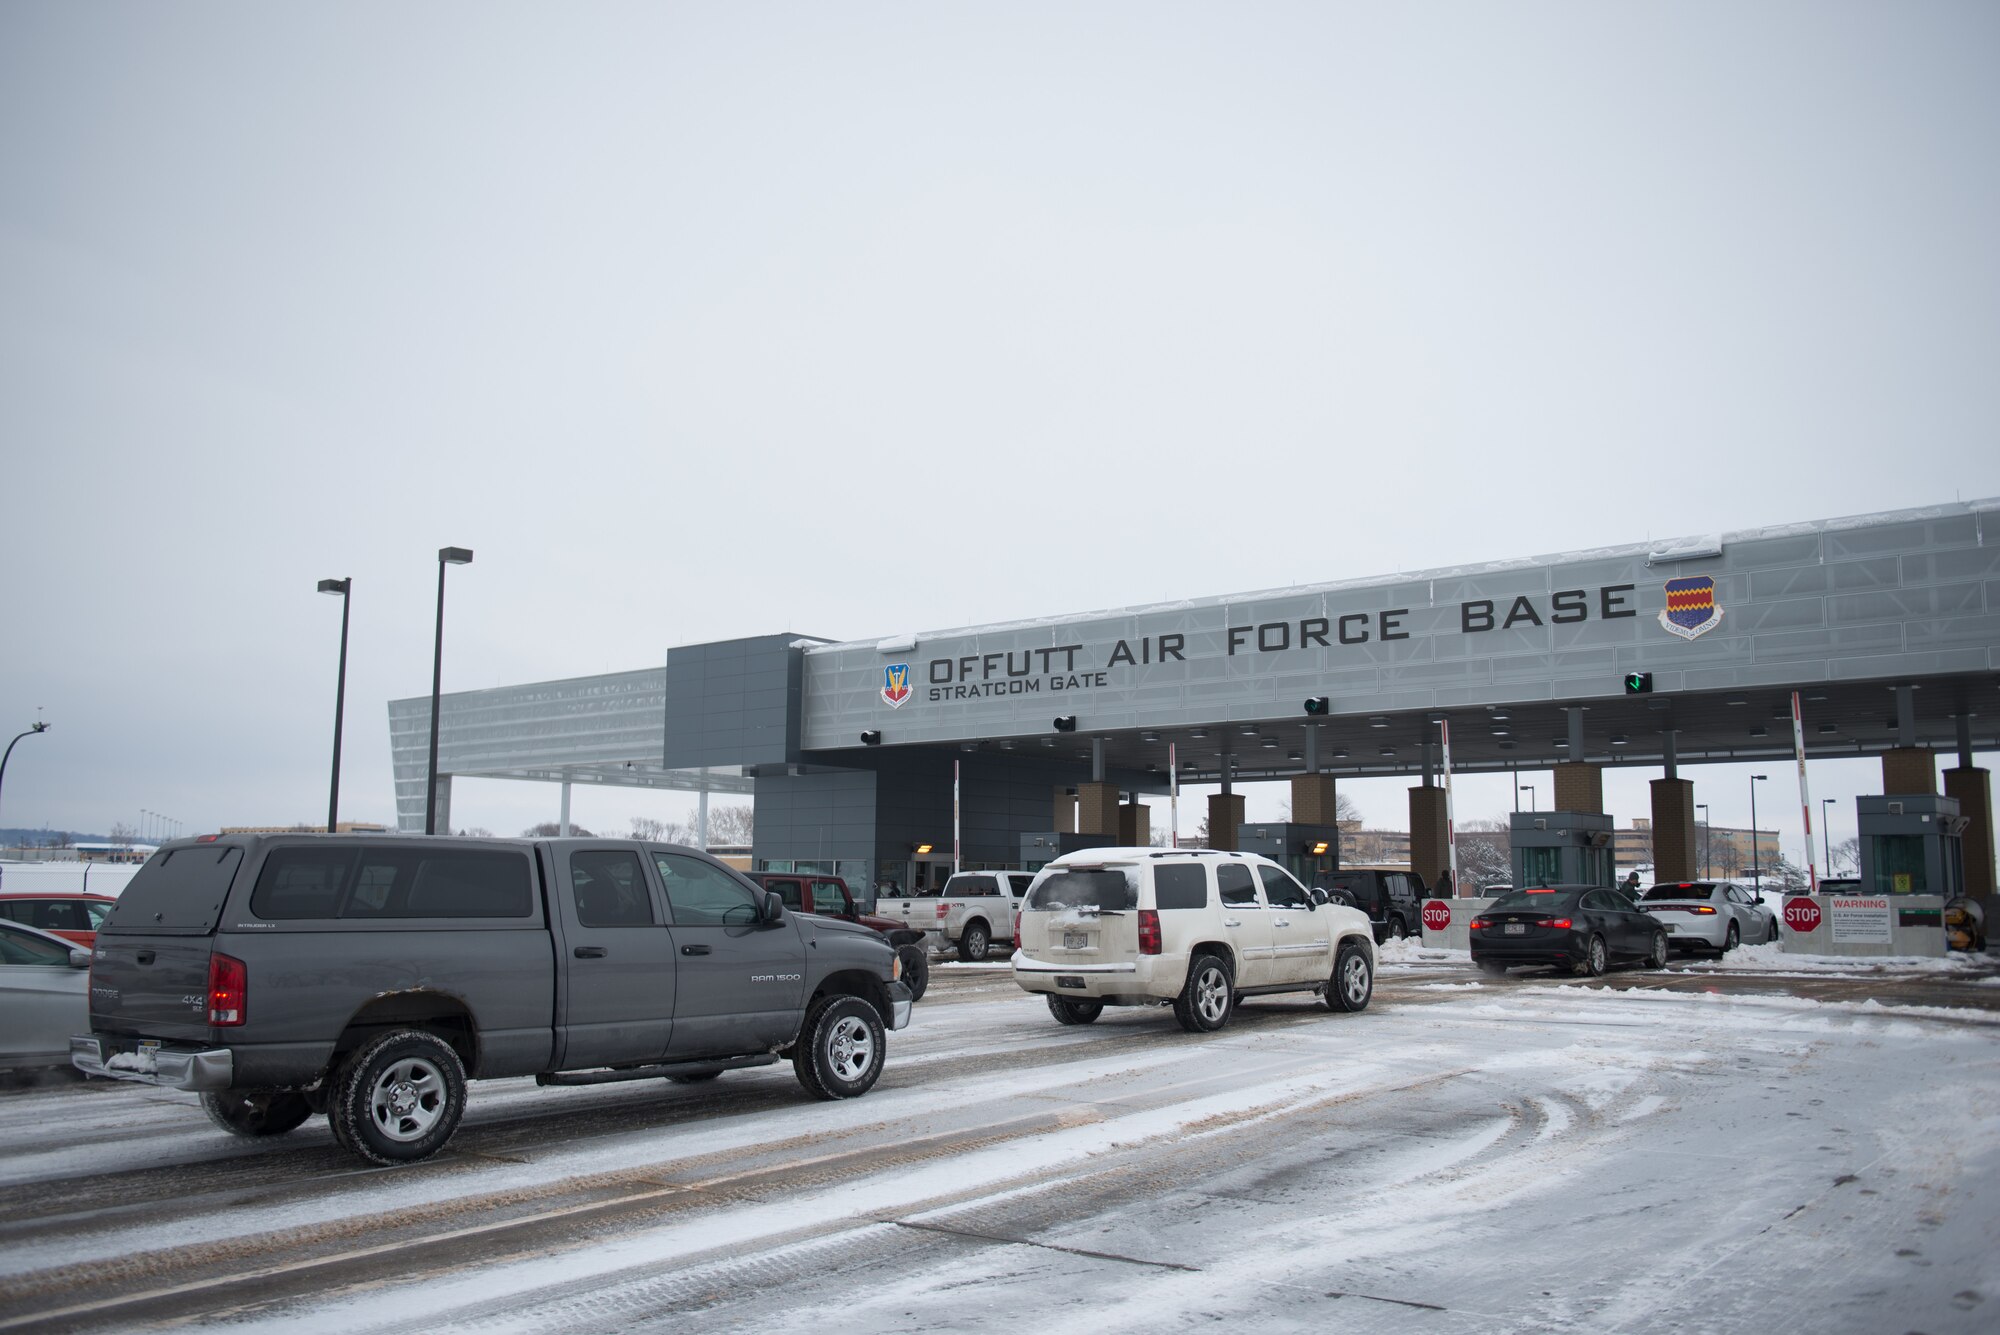 Cars wait in lanes to enter the U.S. Strategic Command gate March 7, 2019, on Offutt Air Force Base. The base was issues a delayed reporting due to snowfall overnight. (U.S. Air Force photo by Tech. Sgt. Rachelle Blake)